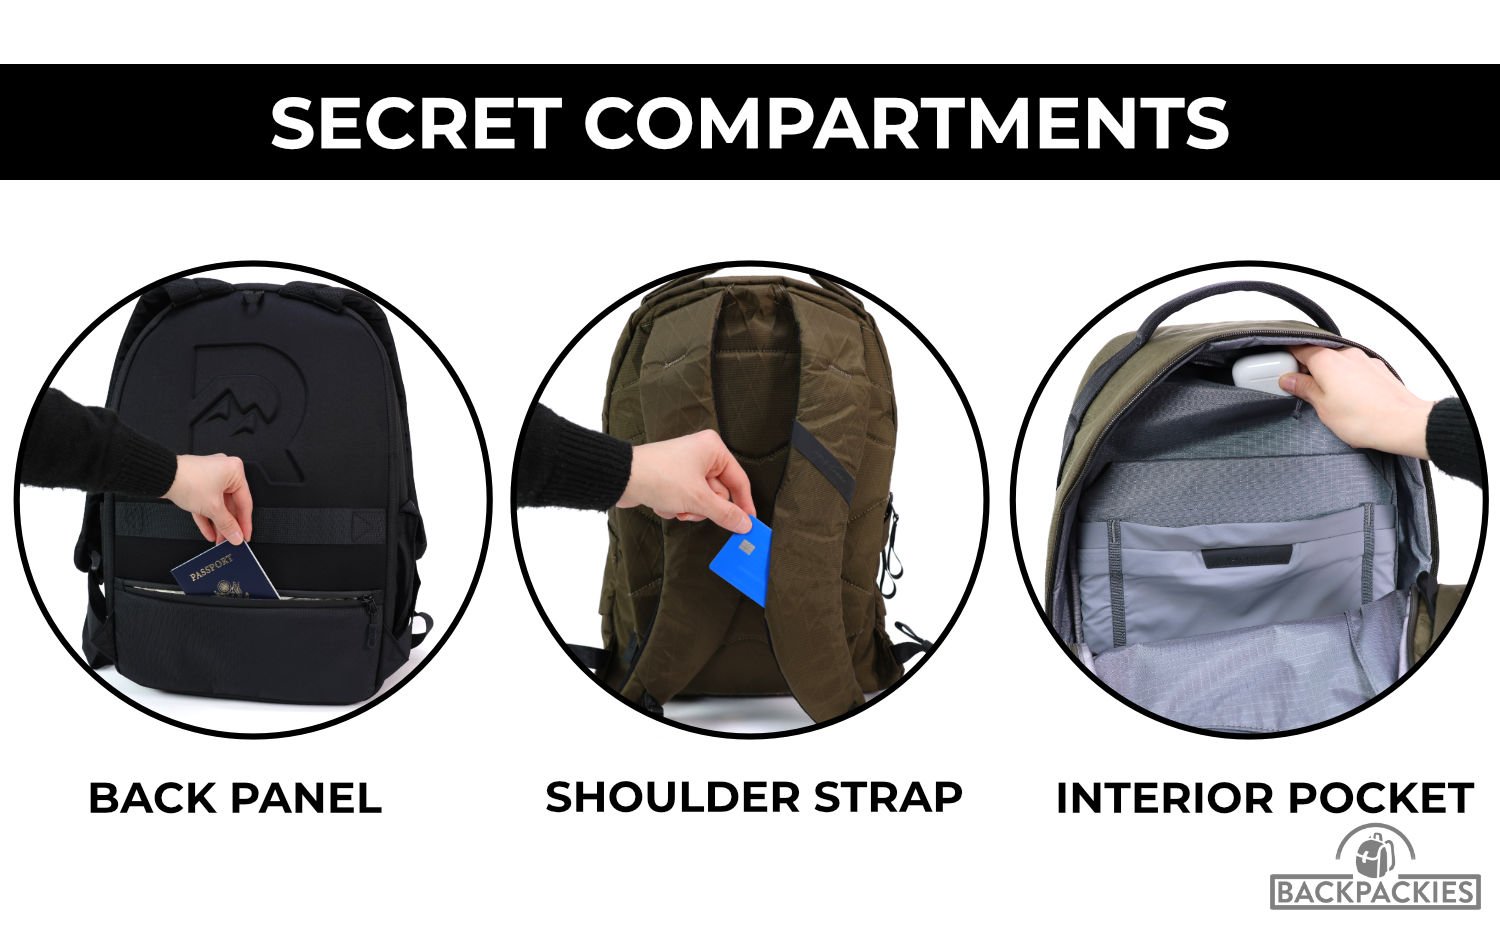 15 Best Backpacks with Secret Compartments - Tested and Reviewed